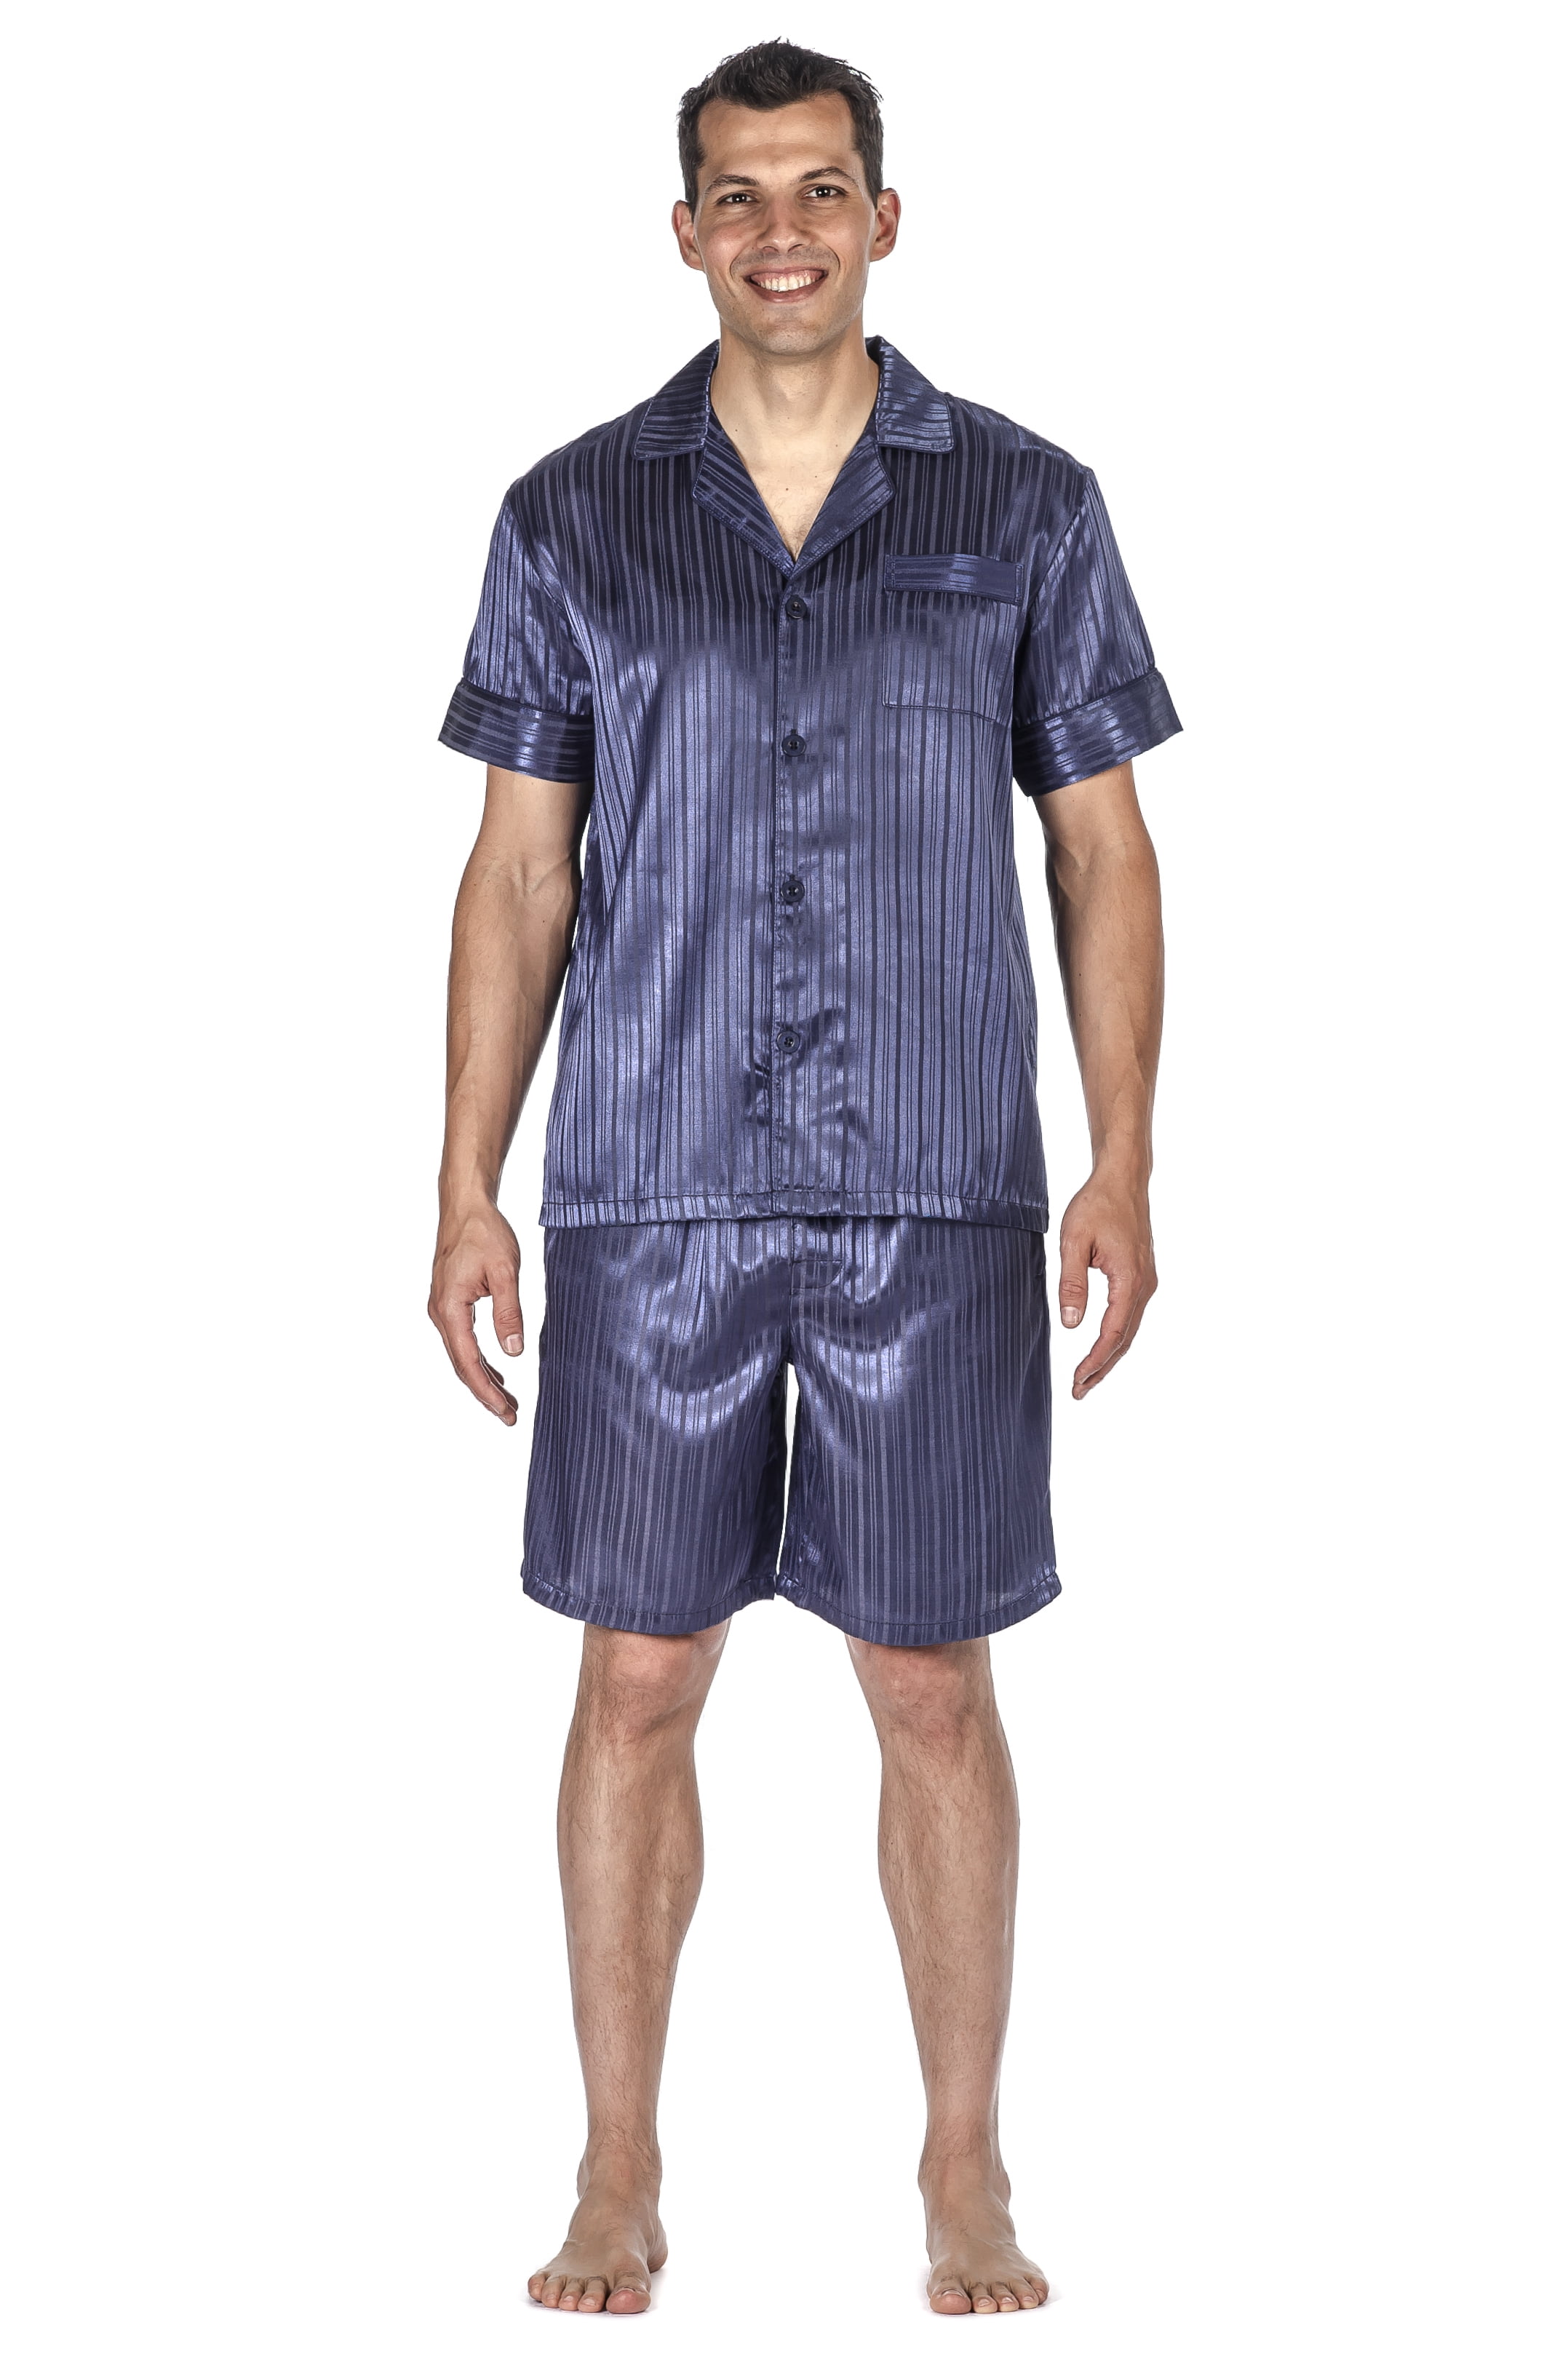 Mens Short-Sleeved Pajamas Shorty pj Set to Button Through in Noble Stripe Look